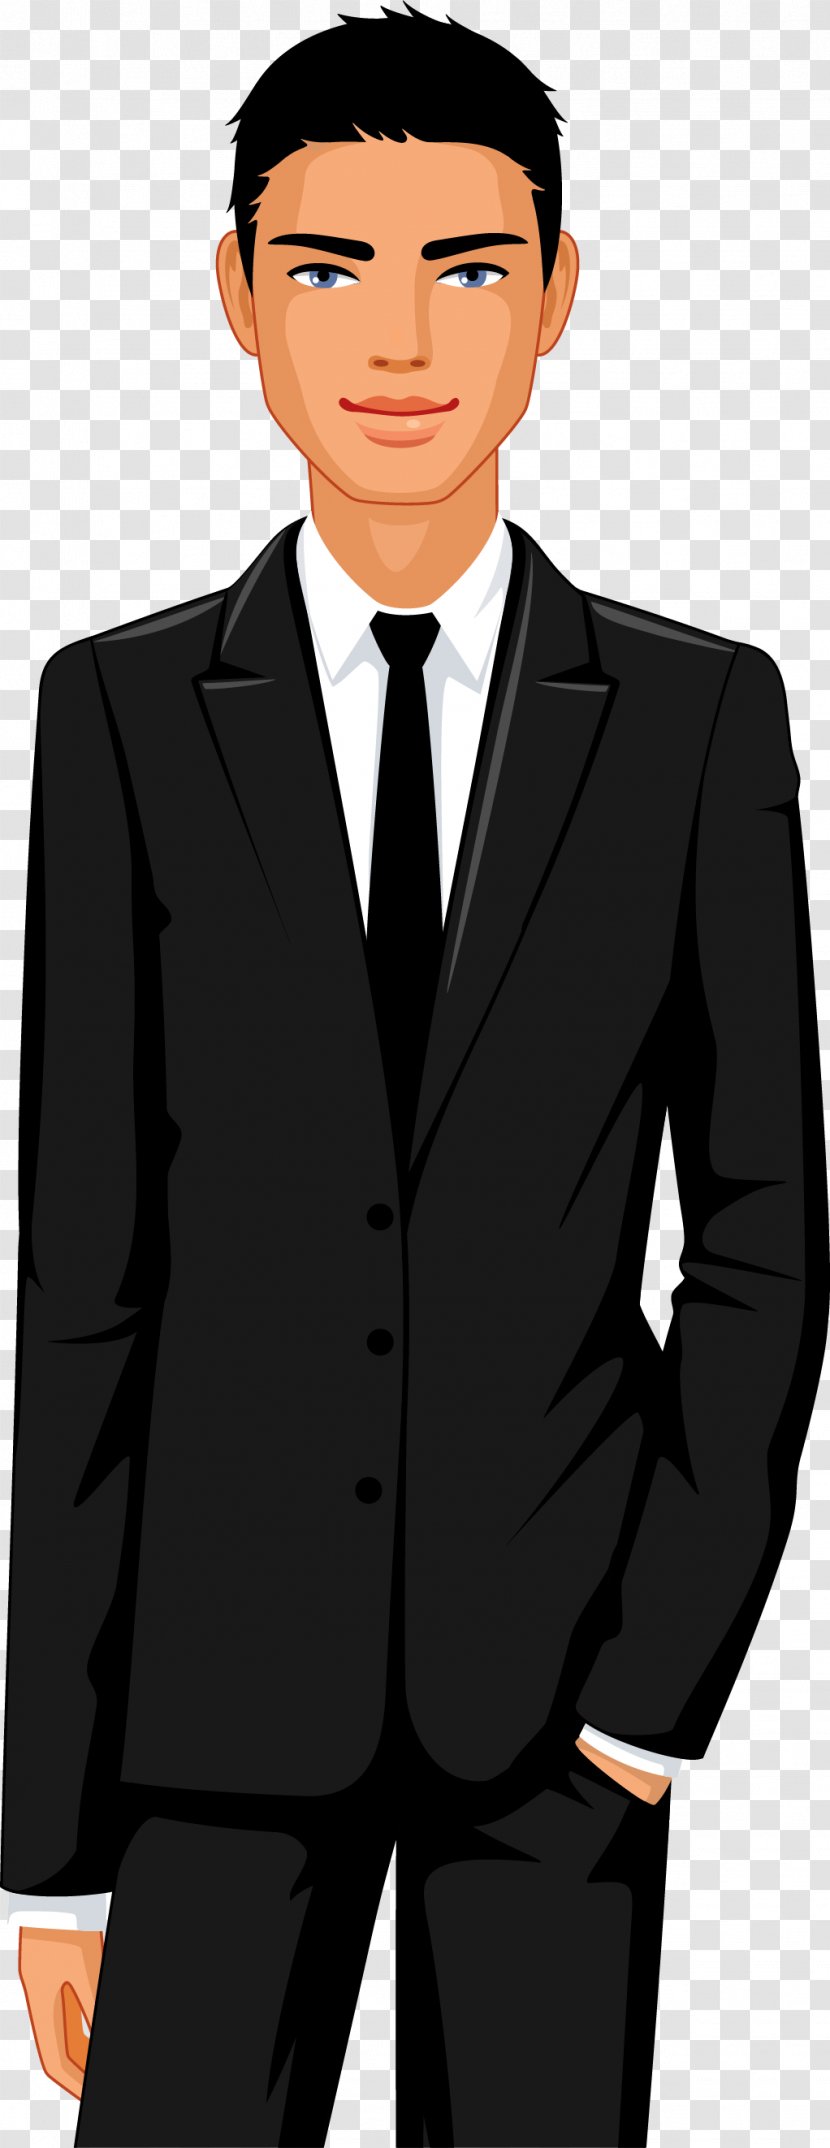 Icon - White Collar Worker - Suit Model Transparent PNG